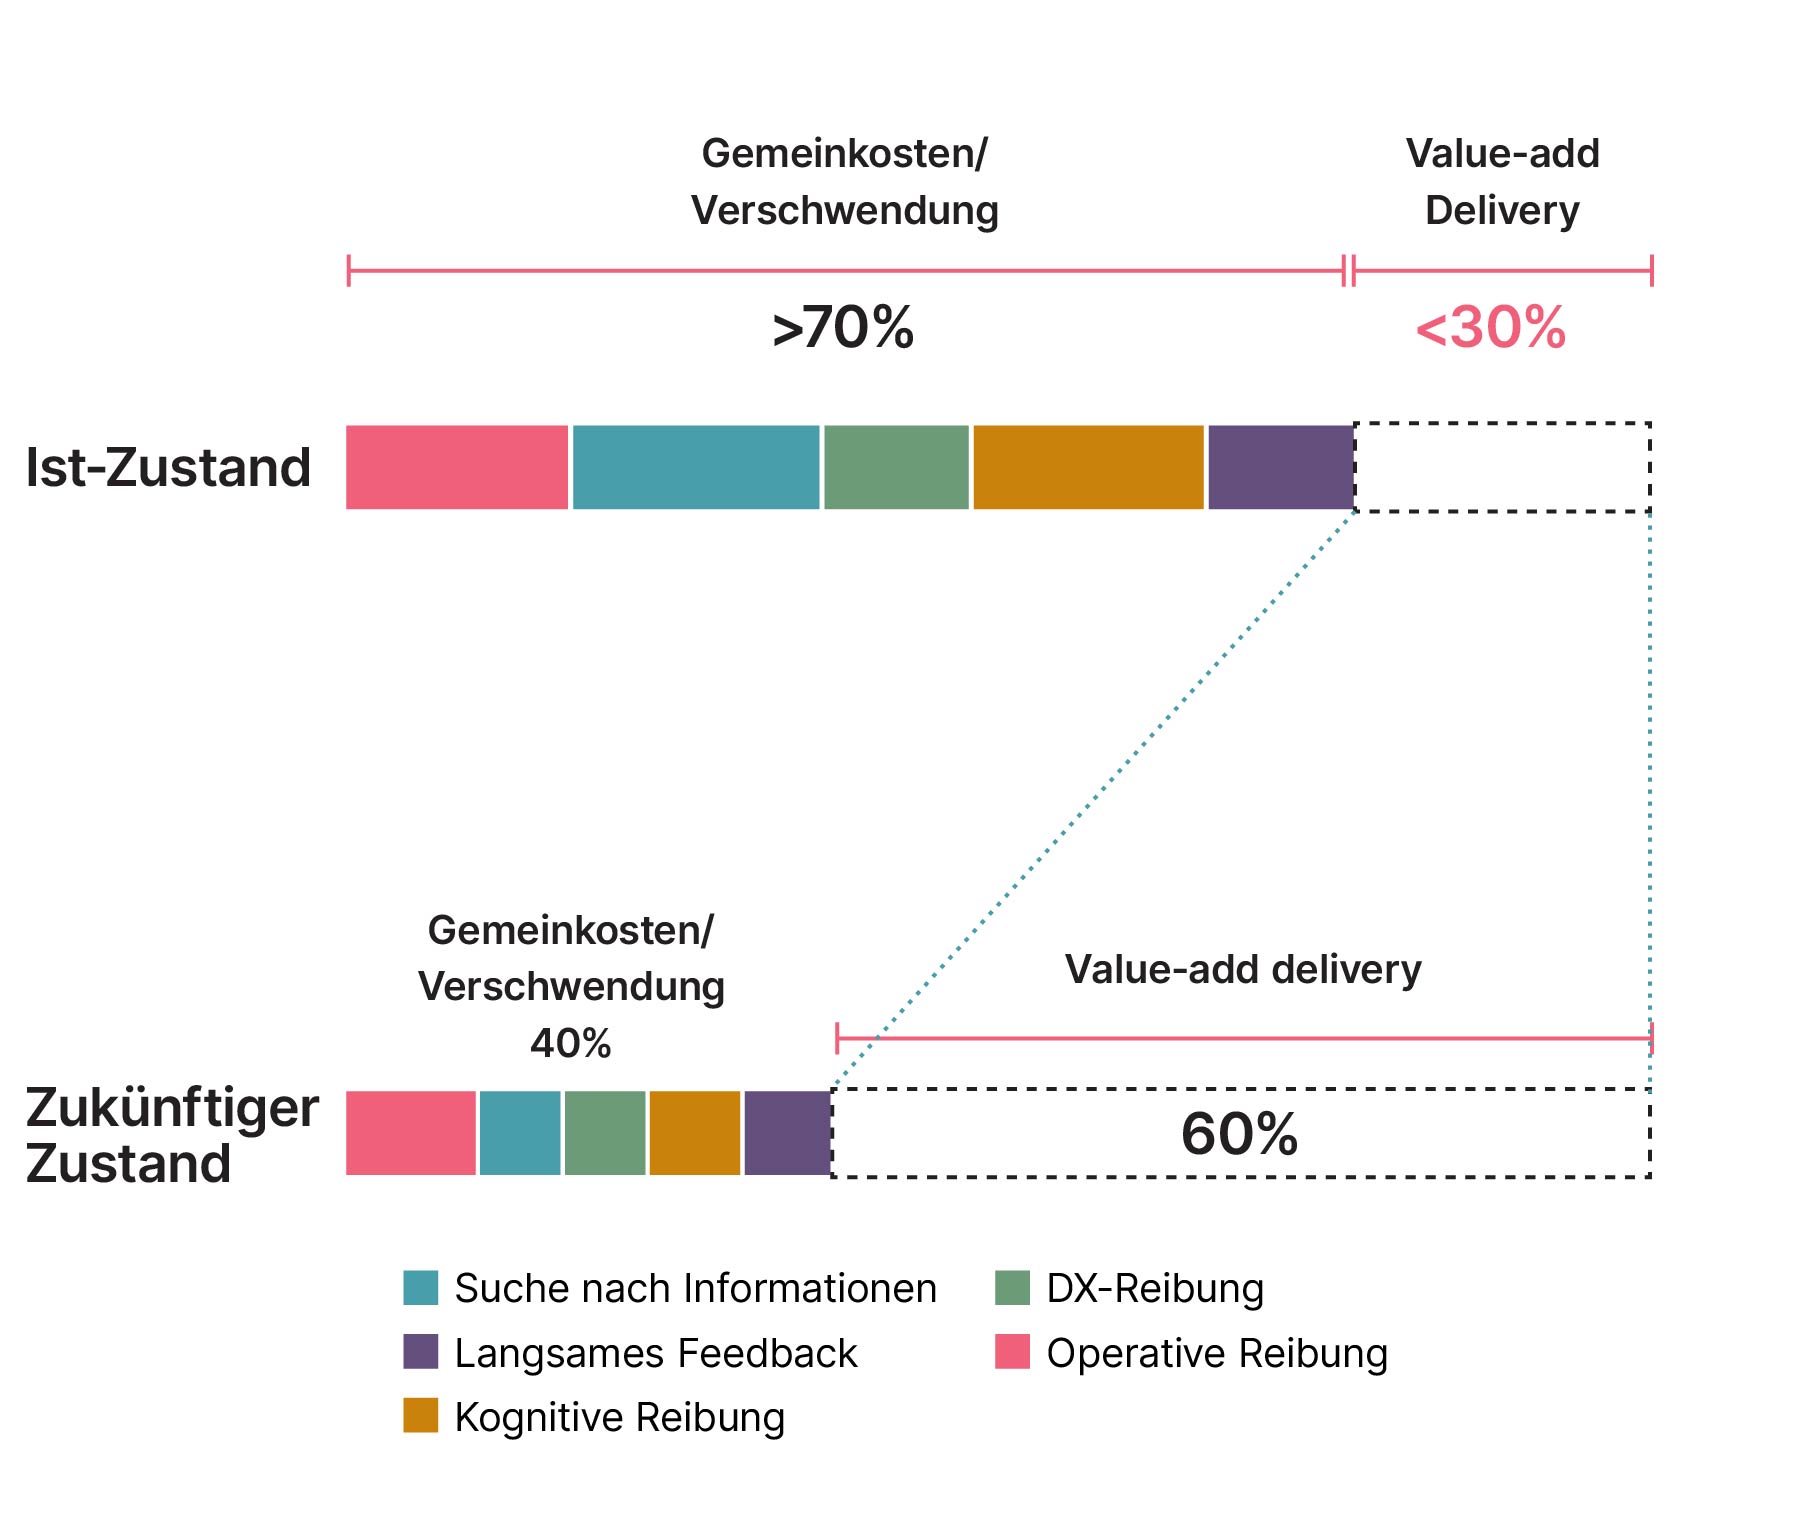 Top bar shows the current state of most organizations which consistent of 30% value-add delivery and 70% overhead or waste versus future state of organizations with engineering effectiveness can increase value-add delivery to 60% and reduce waste to 40%